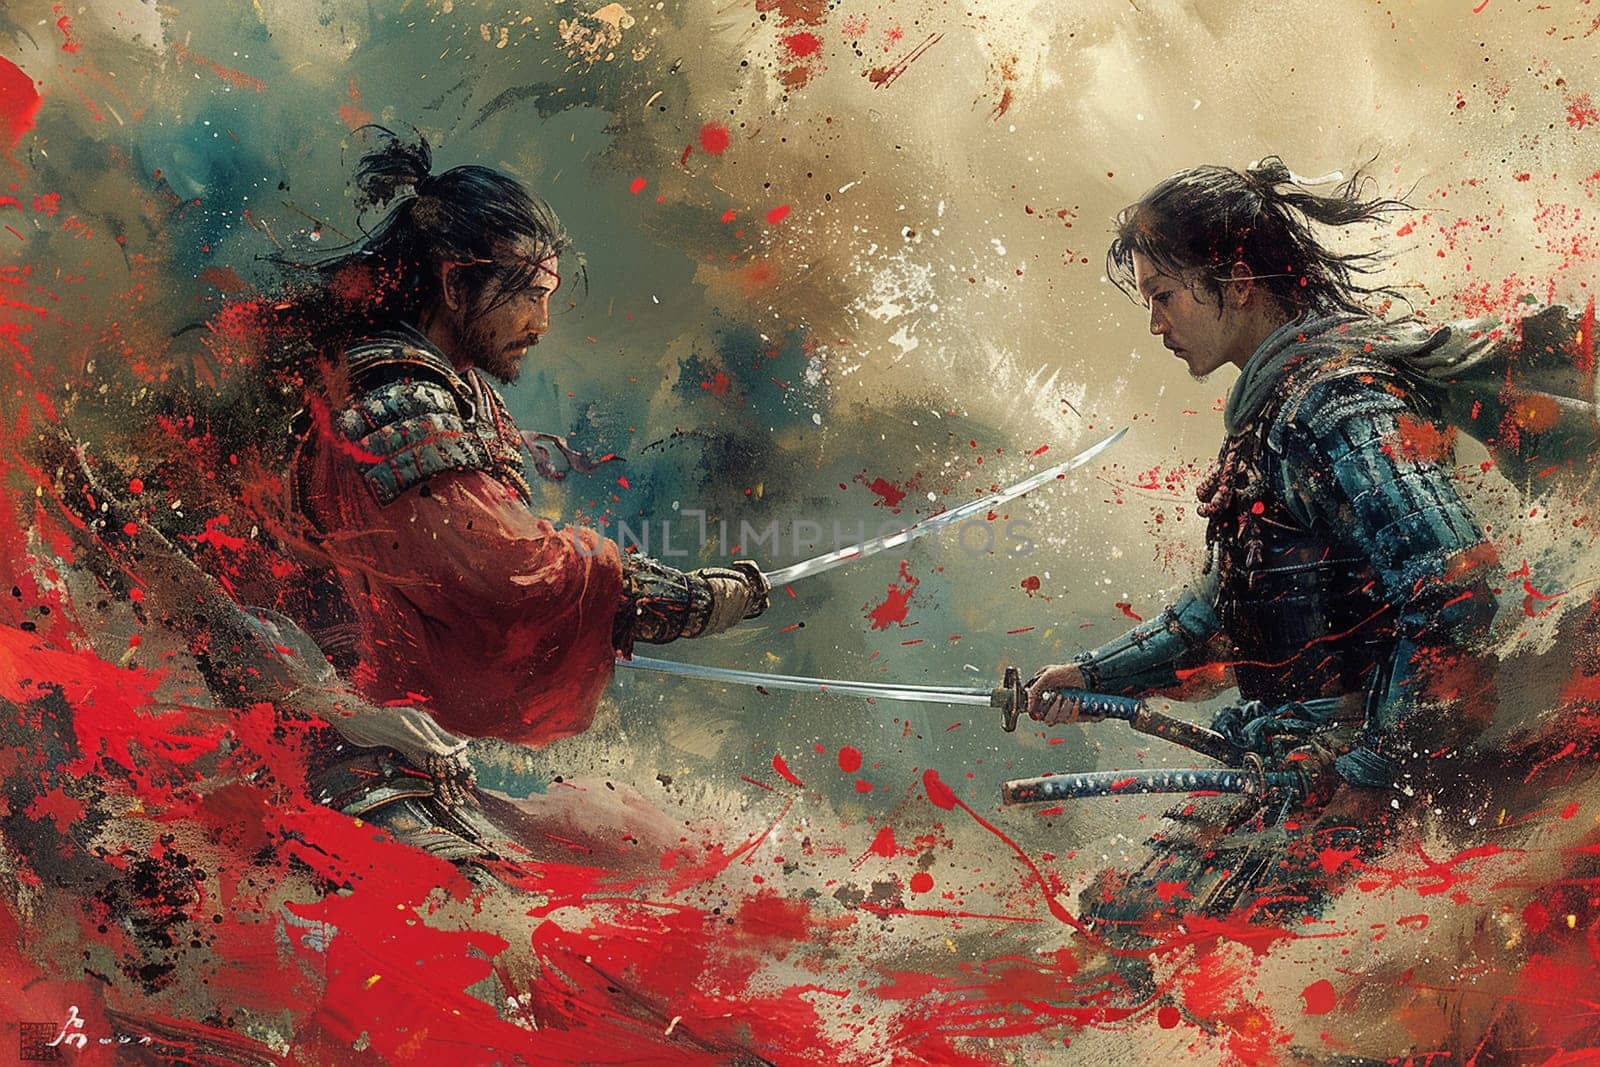 Duel between mythic samurai warriors, captured in a dynamic anime style with dramatic composition.